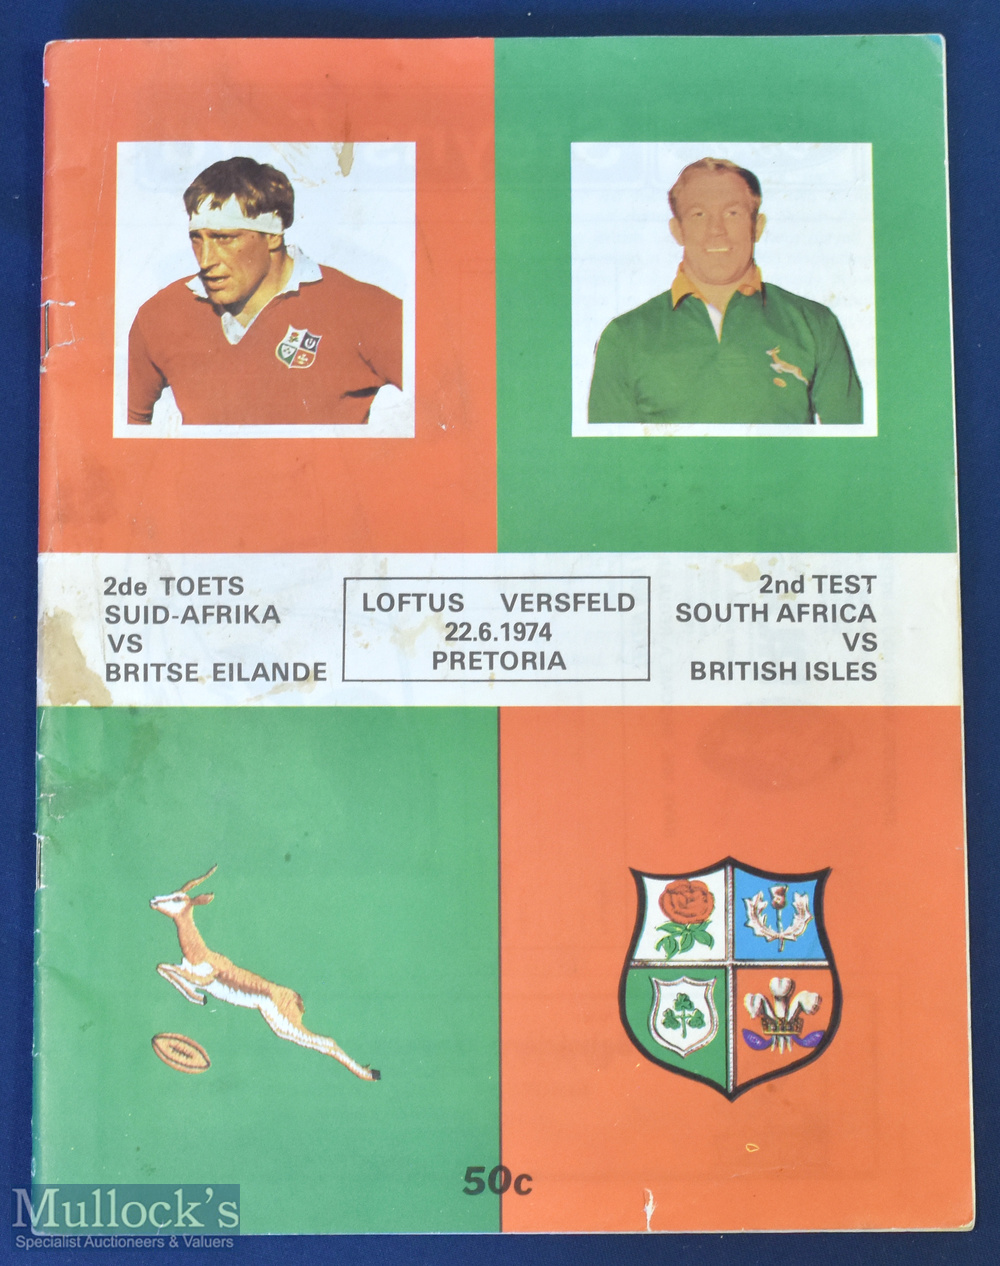 1974 Unbeaten British & Irish Lions in SA 2nd Test Rugby Programme: Bold colourful cover and large